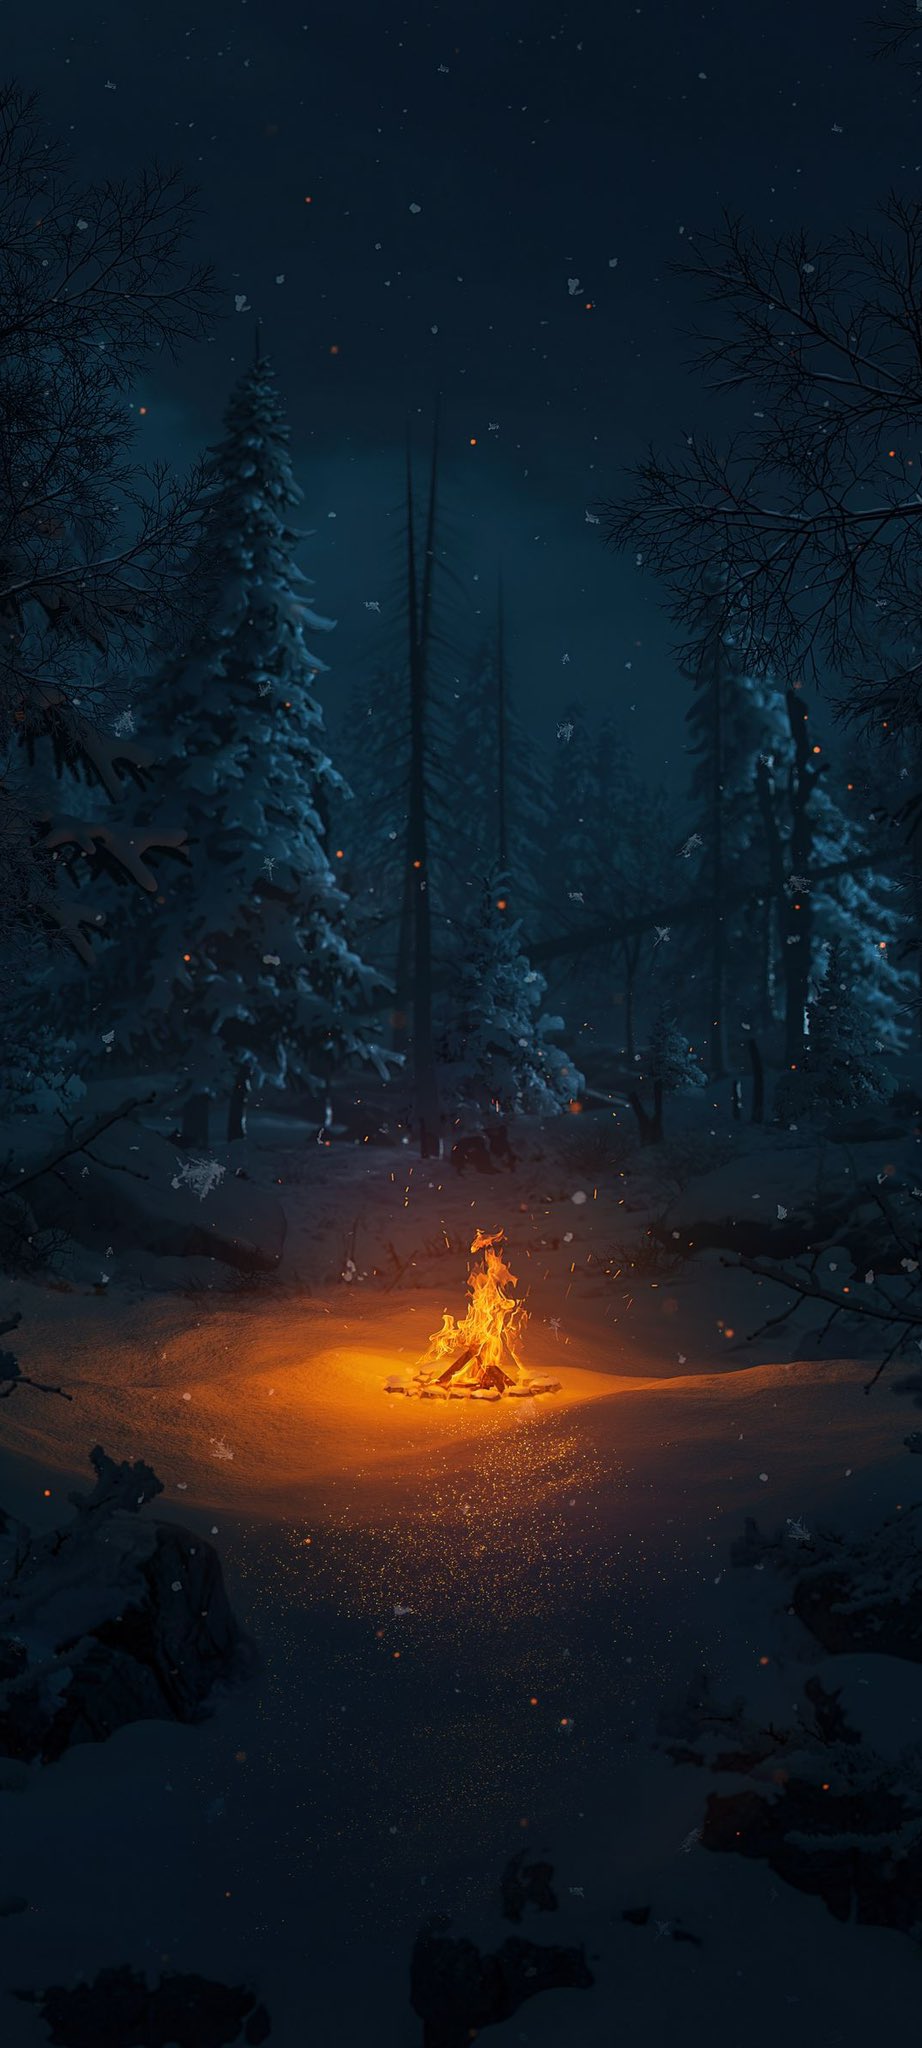 Wallpaper #wallpaper for your #smartphone #Set #Night #Fire #Snow #Winter #Tree #Fullhd